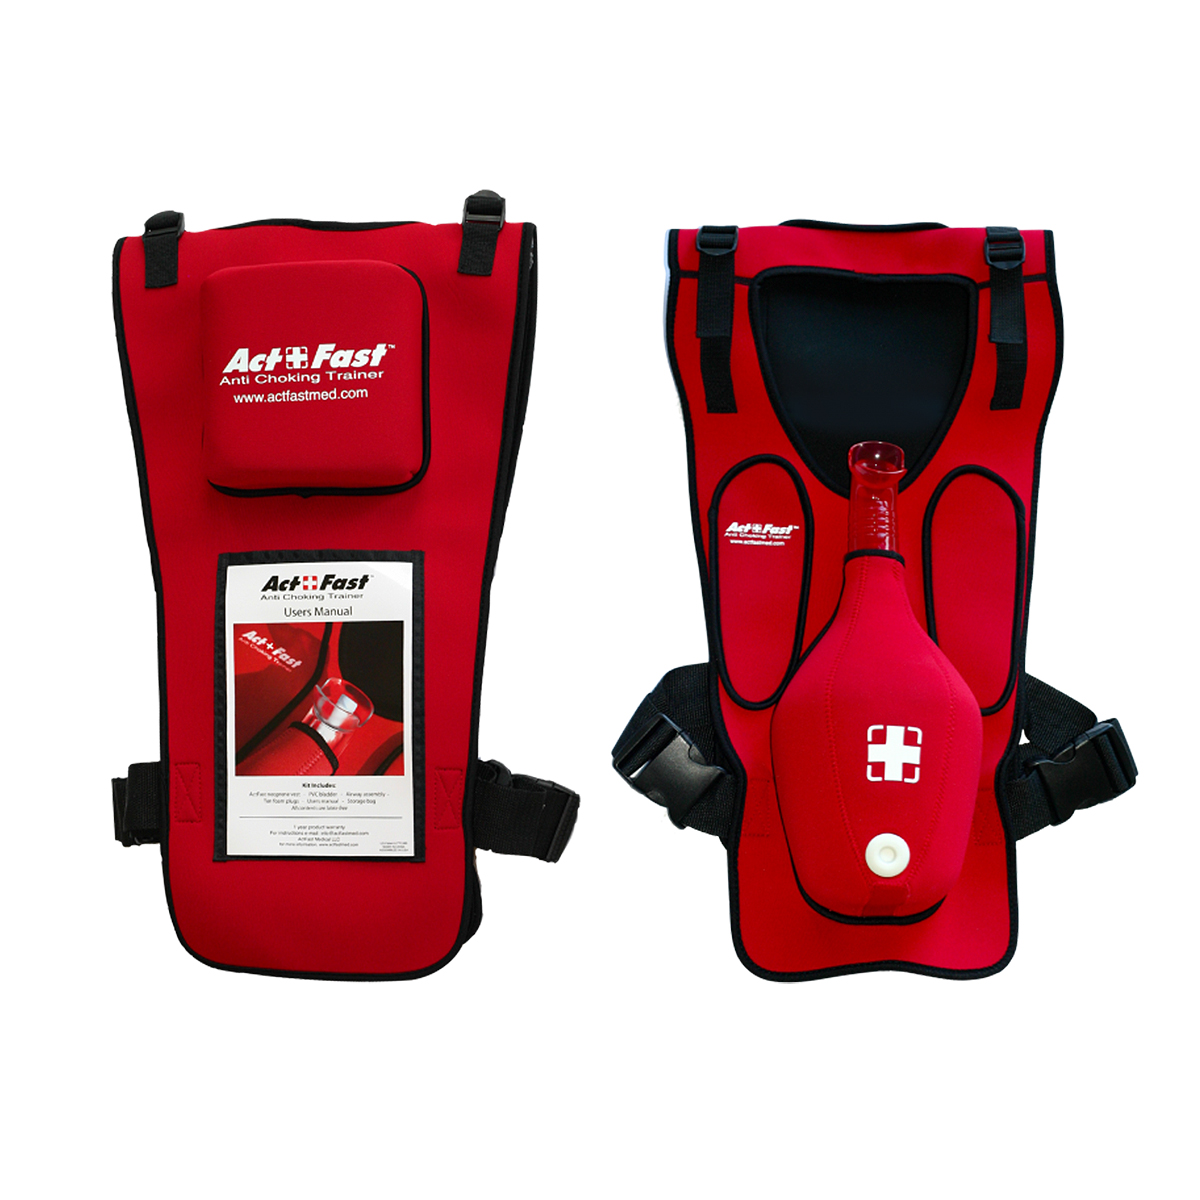 https://www.3bscientific.com/thumblibrary/W43300R/W43300R_01_1200_1200_Act-Fast-Rescue-Choking-Vest-Red-with-Slap-Back.jpg